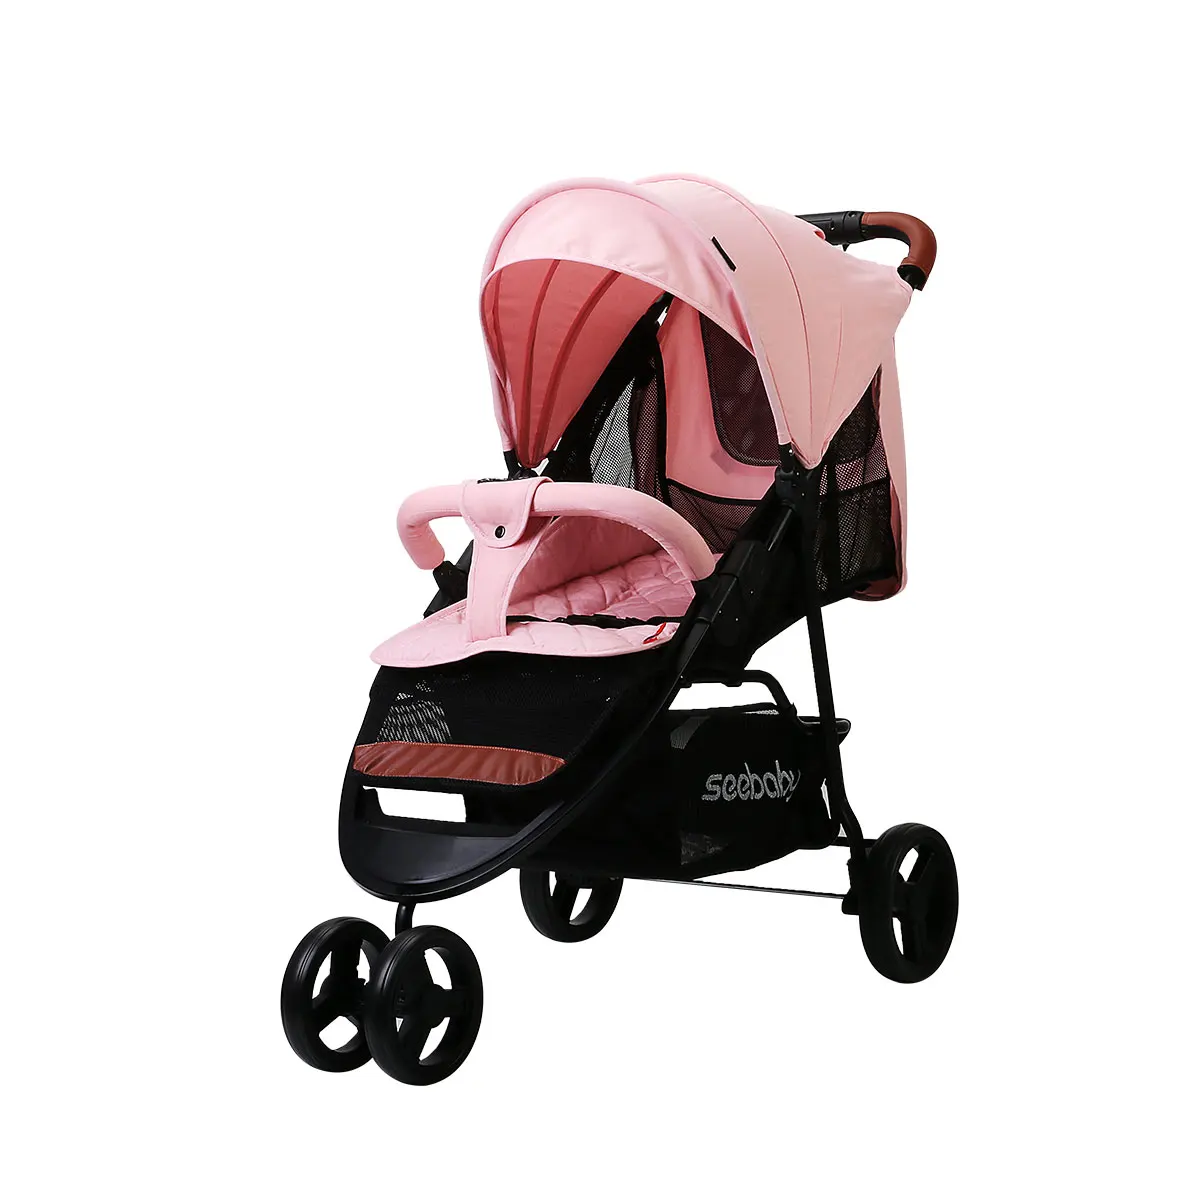 reborn baby stroller and carseat